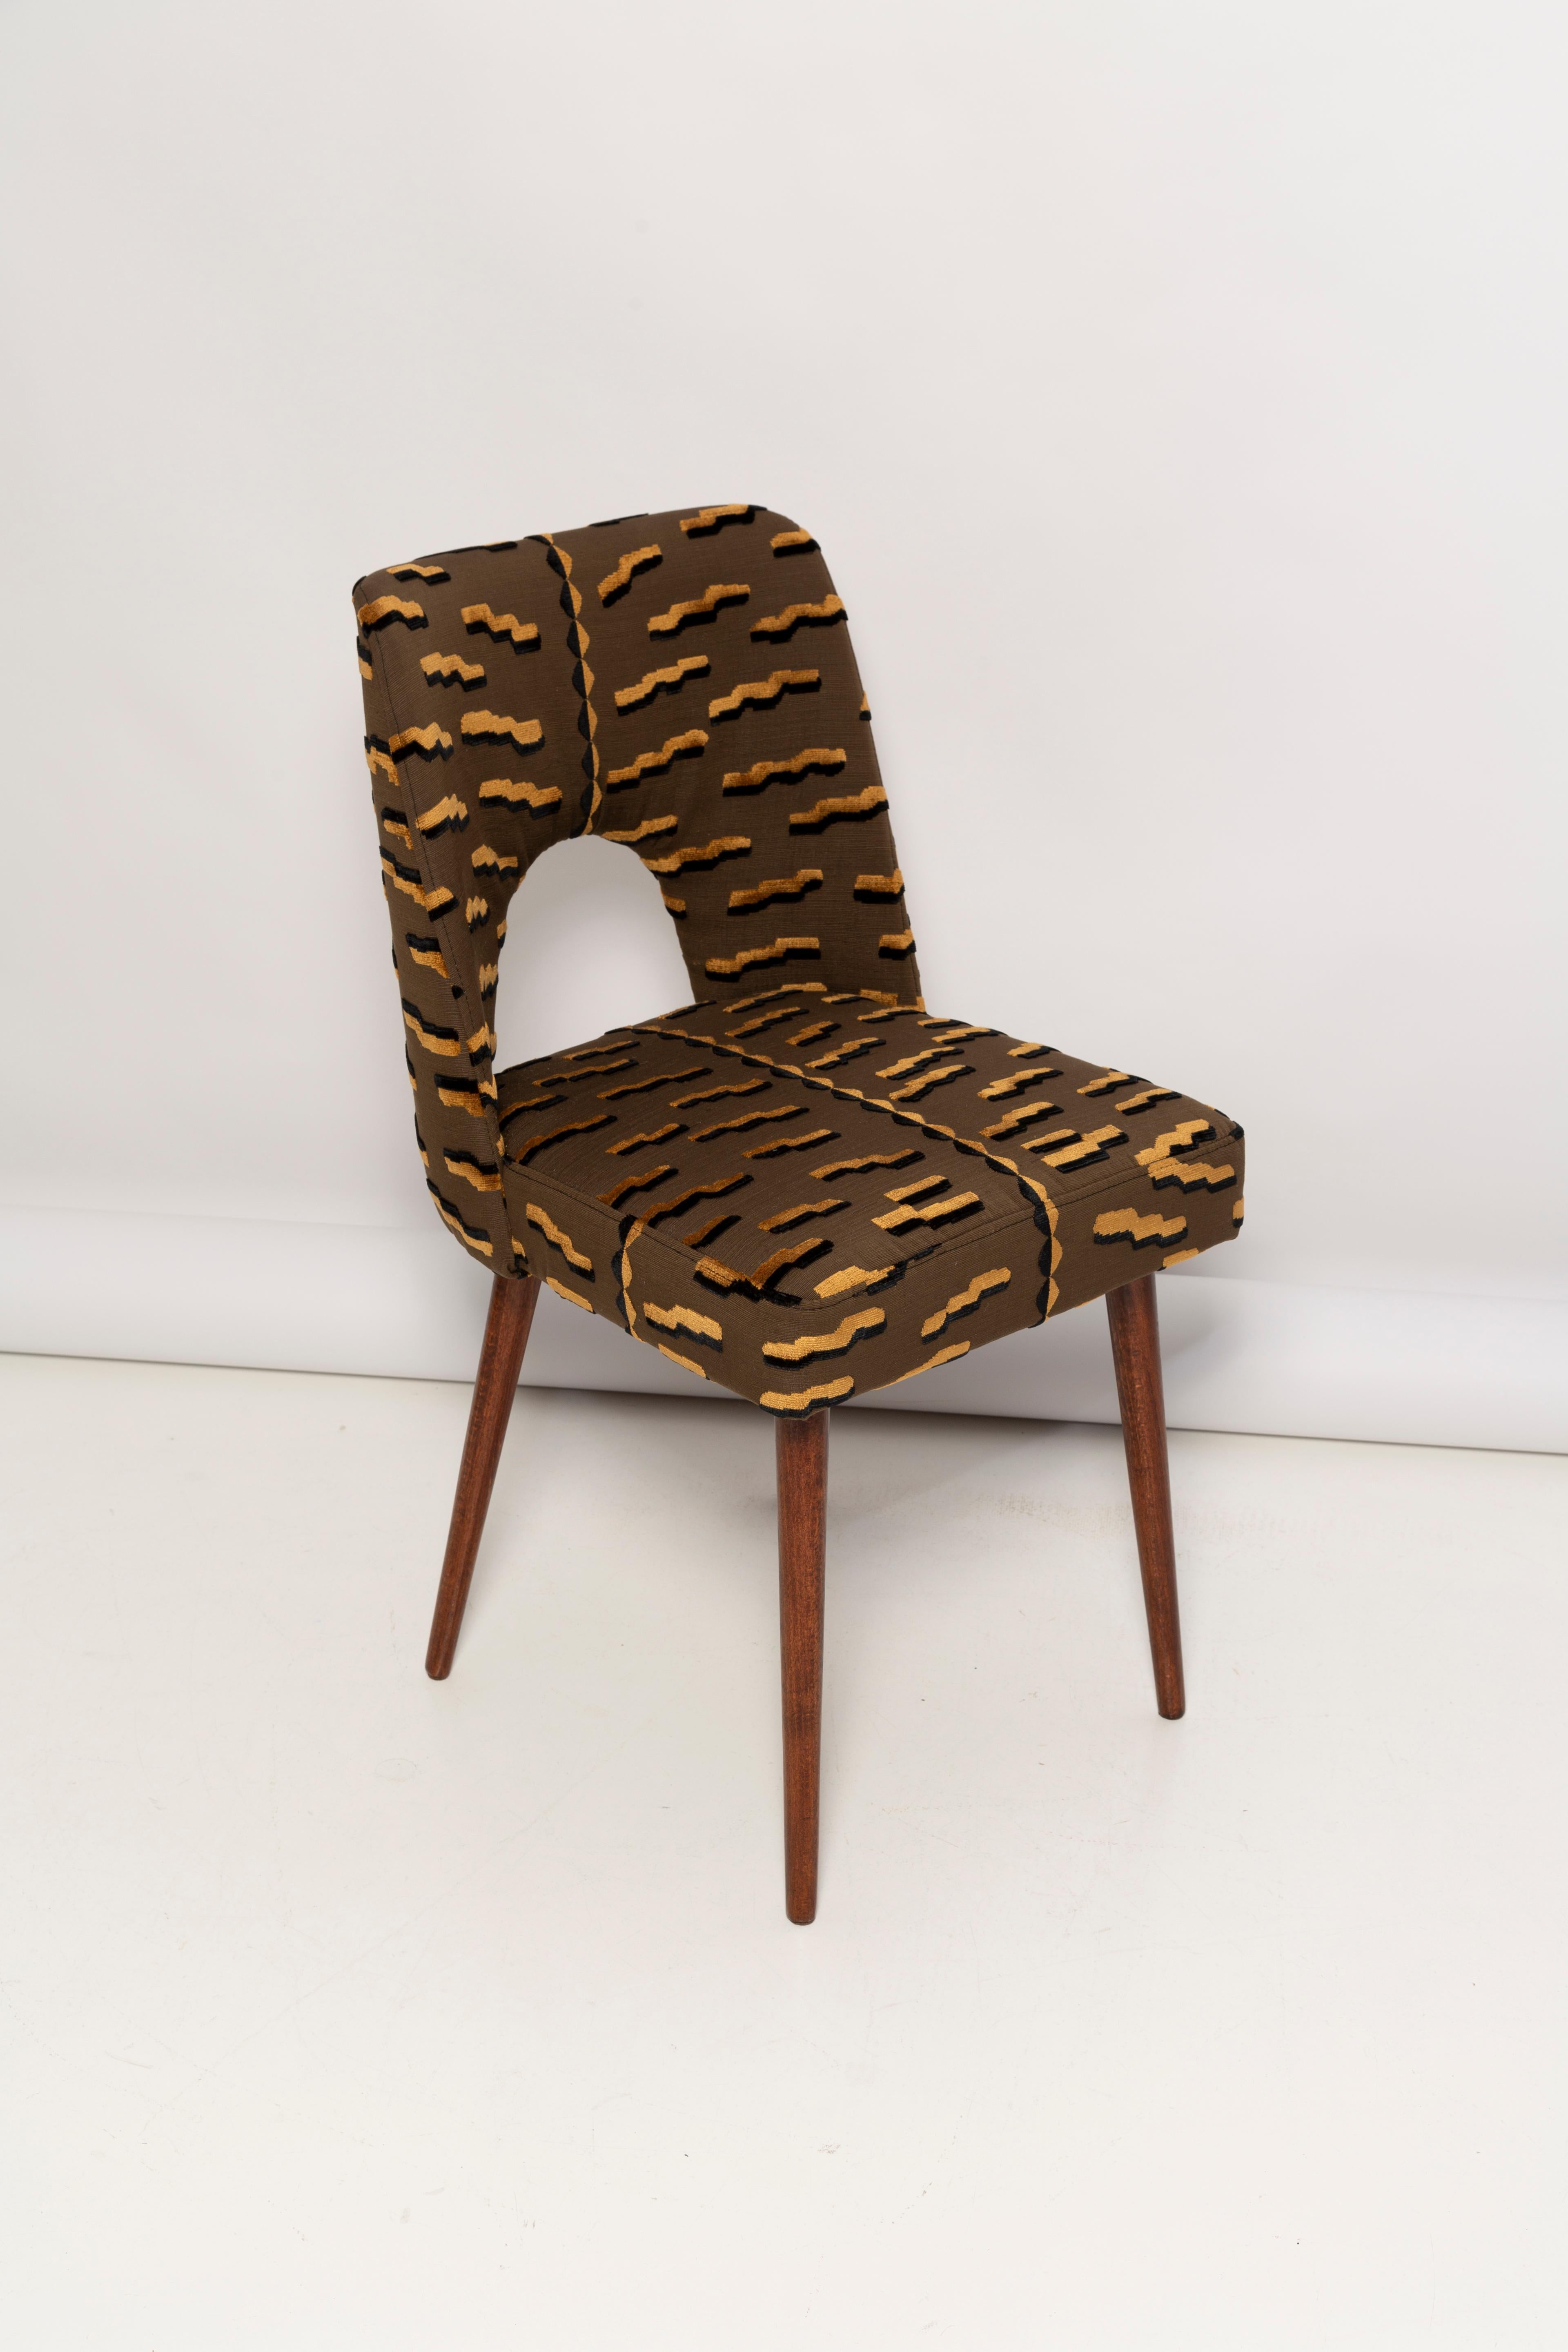 Textile Mid Century Brown Tiger Beat Jacquard Velvet Shell Chair, Europe, 1960s For Sale